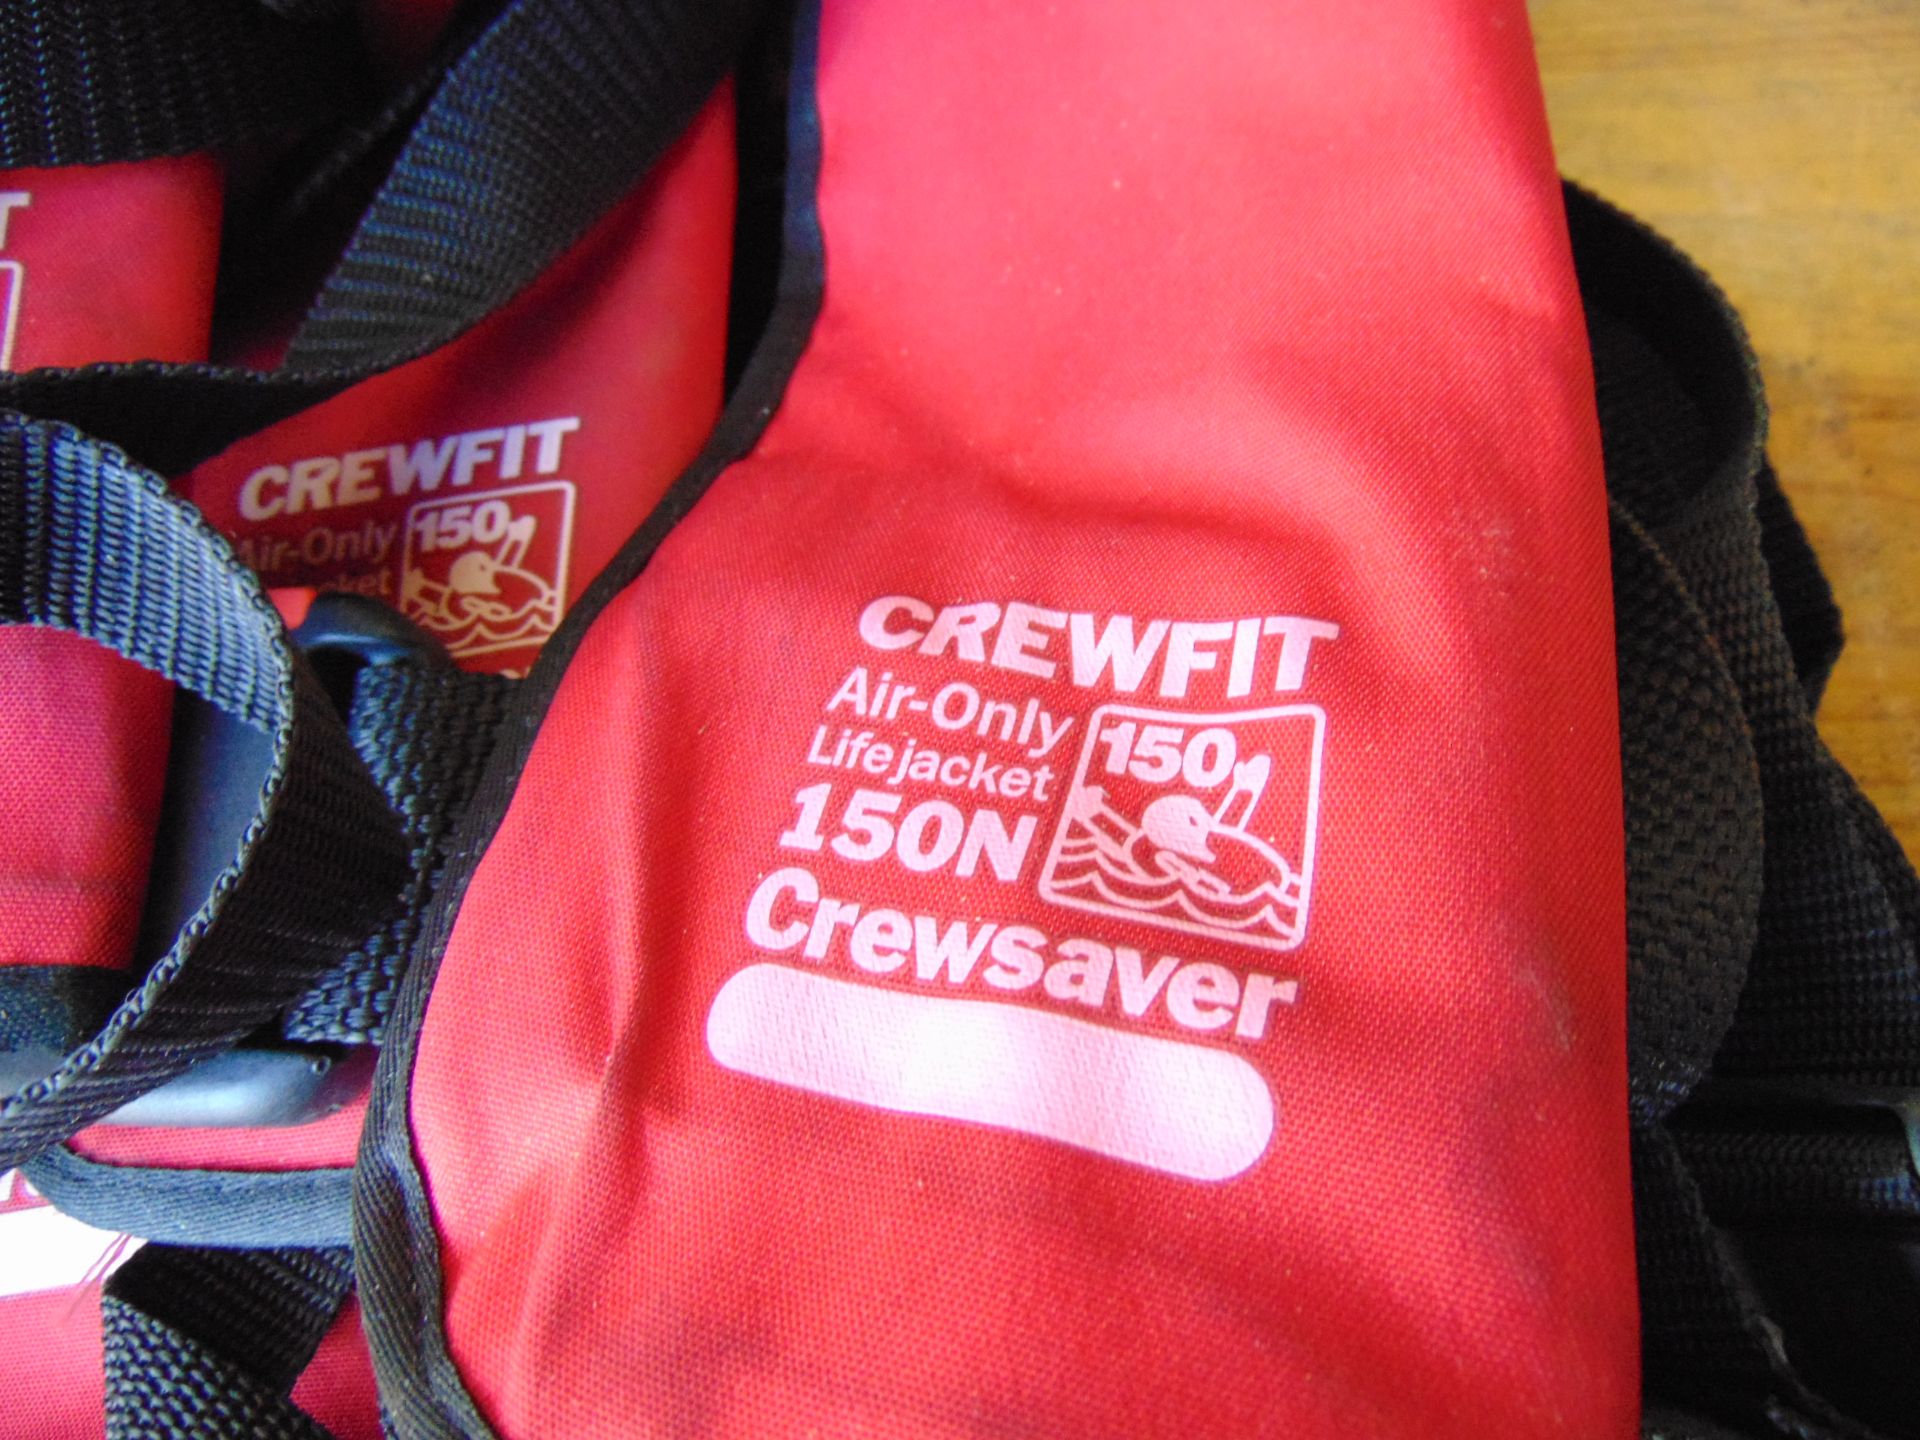 6 x Crew Saver 150 N Life Jackets from UK Fire / Rescue Services - Image 4 of 6